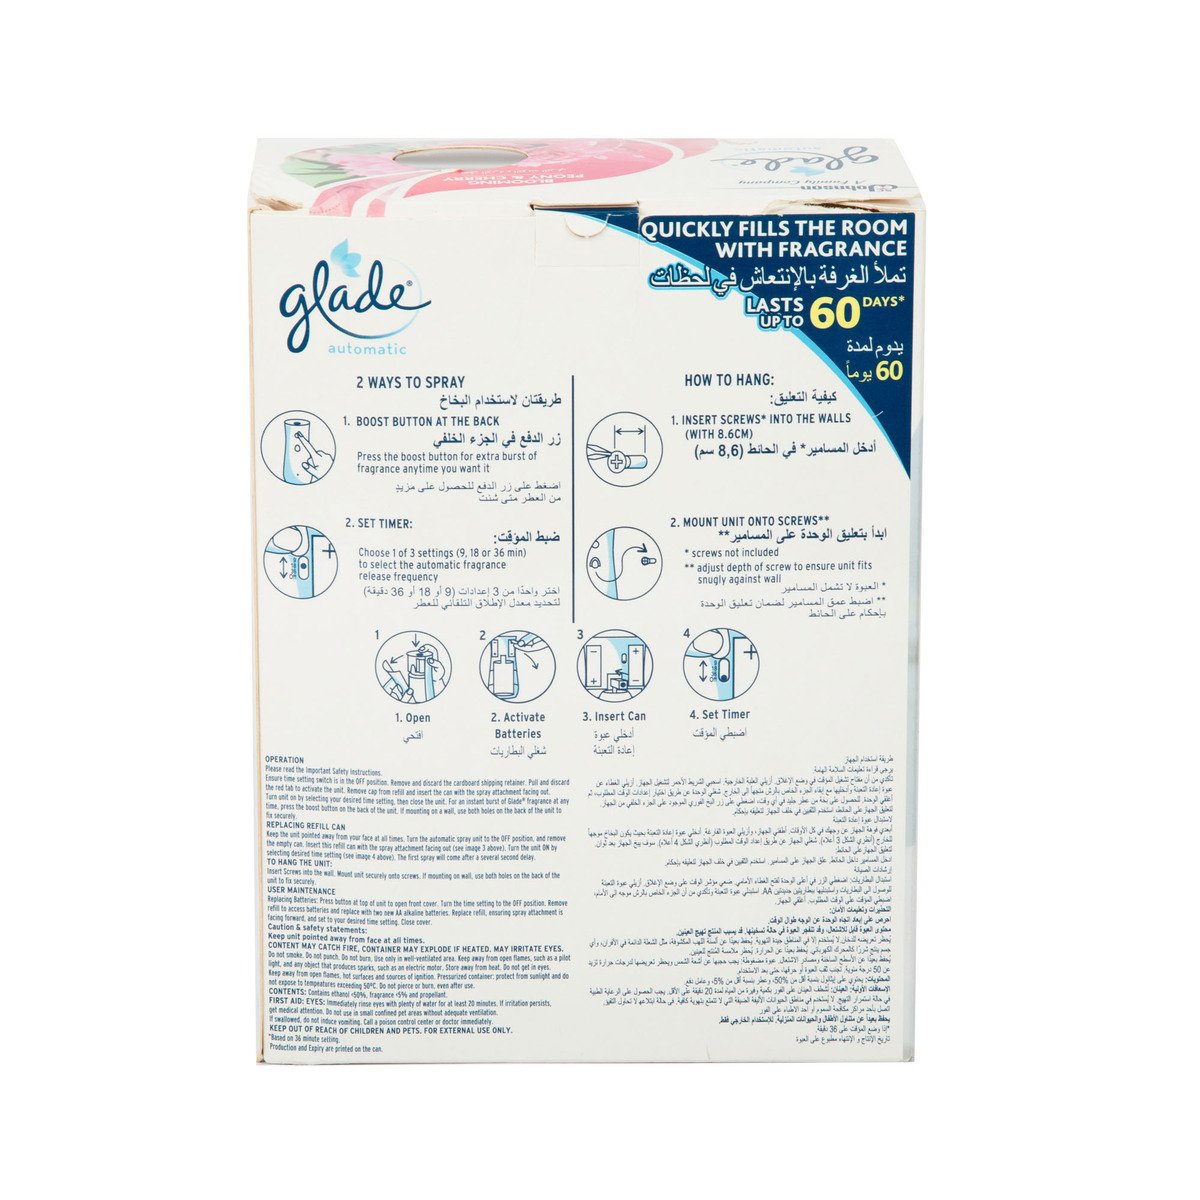 Glade 3in1 Automatic Spray Unit + Blooming Peony & Cherry Refill Value Pack 175ml